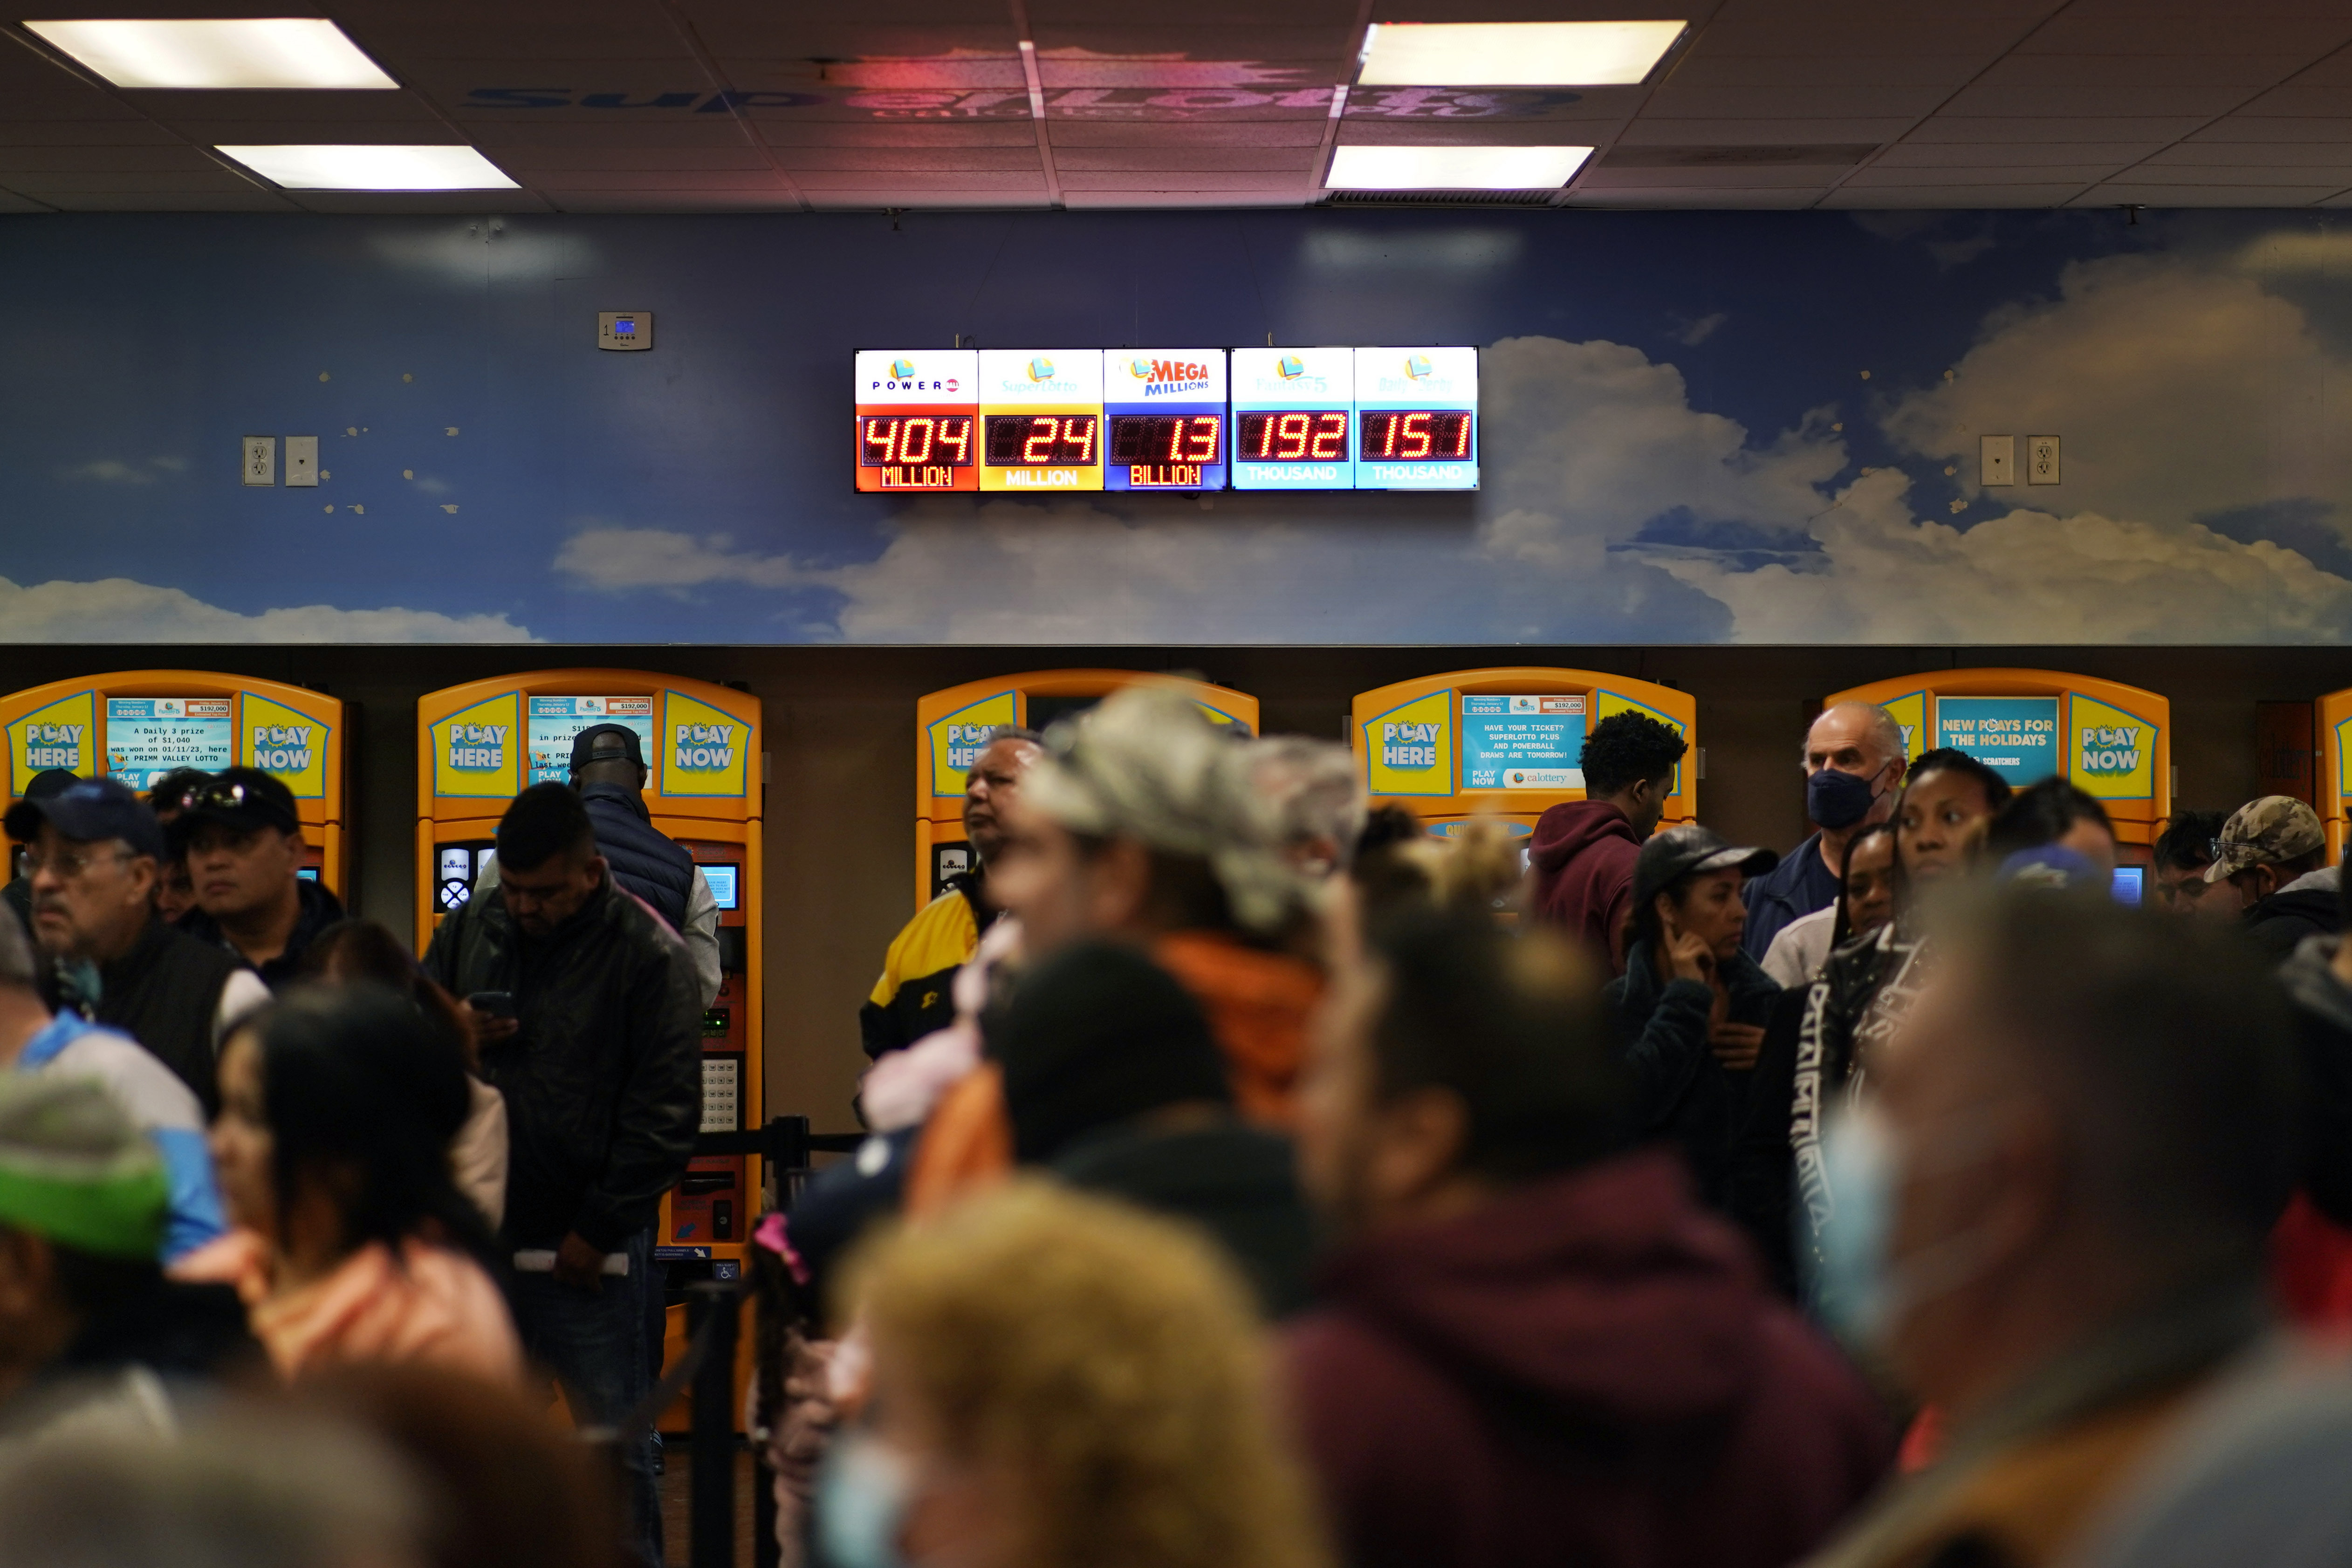 People wait in line at "The Lotto Store at Primm" just inside the California border Friday, Jan. 13, 2023, near Primm, Nev. Mega Millions players will have another chance Friday night to end months of losing and finally win a jackpot that has grown to $1.35 billion